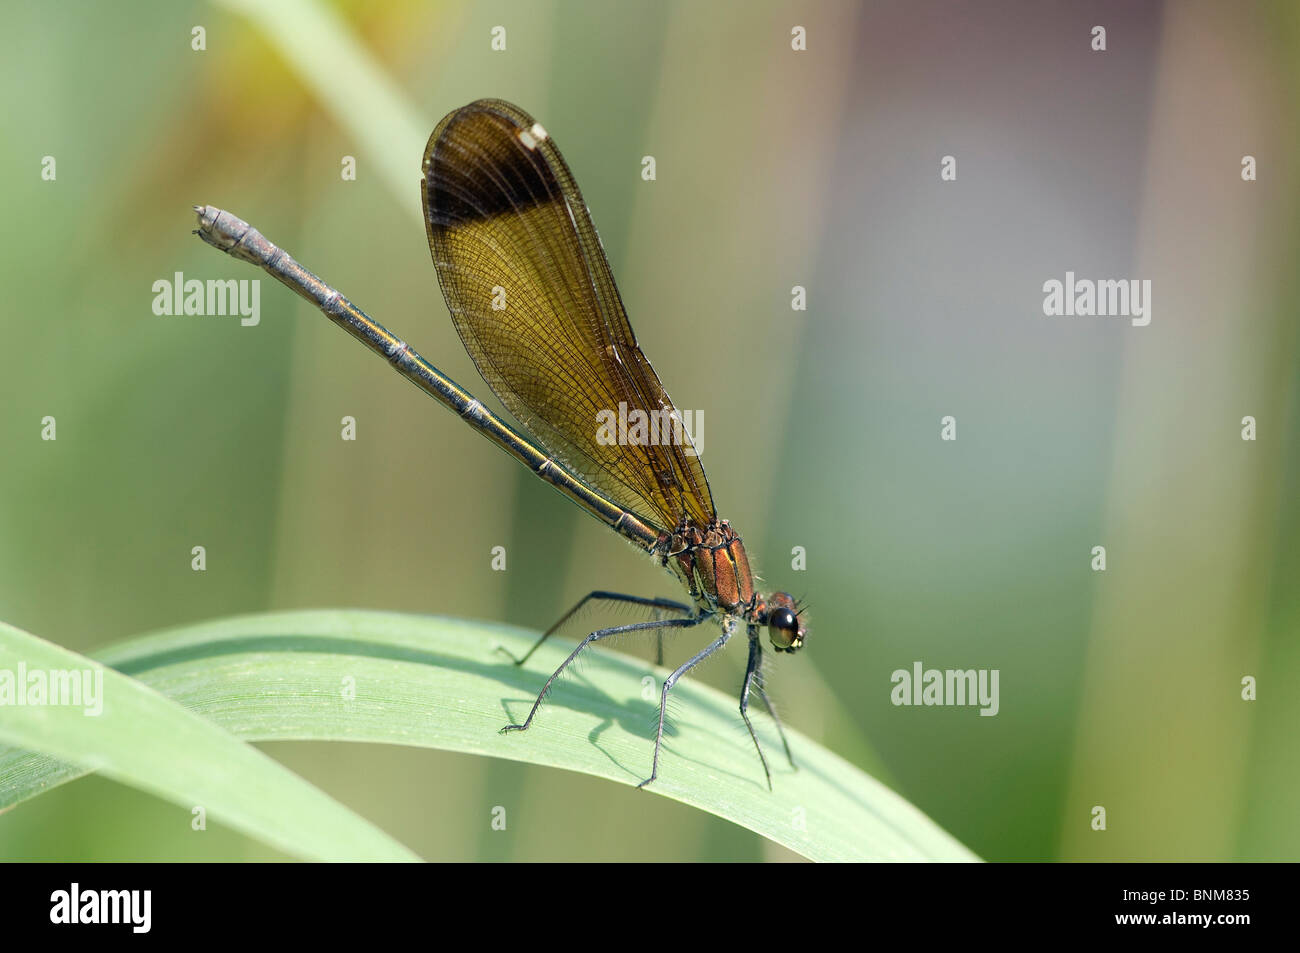 Copper Demoiselle dragonfly Calopteryx haemorrhoidalis portrait plant grass blade of grass sitting nature animal insect Stock Photo